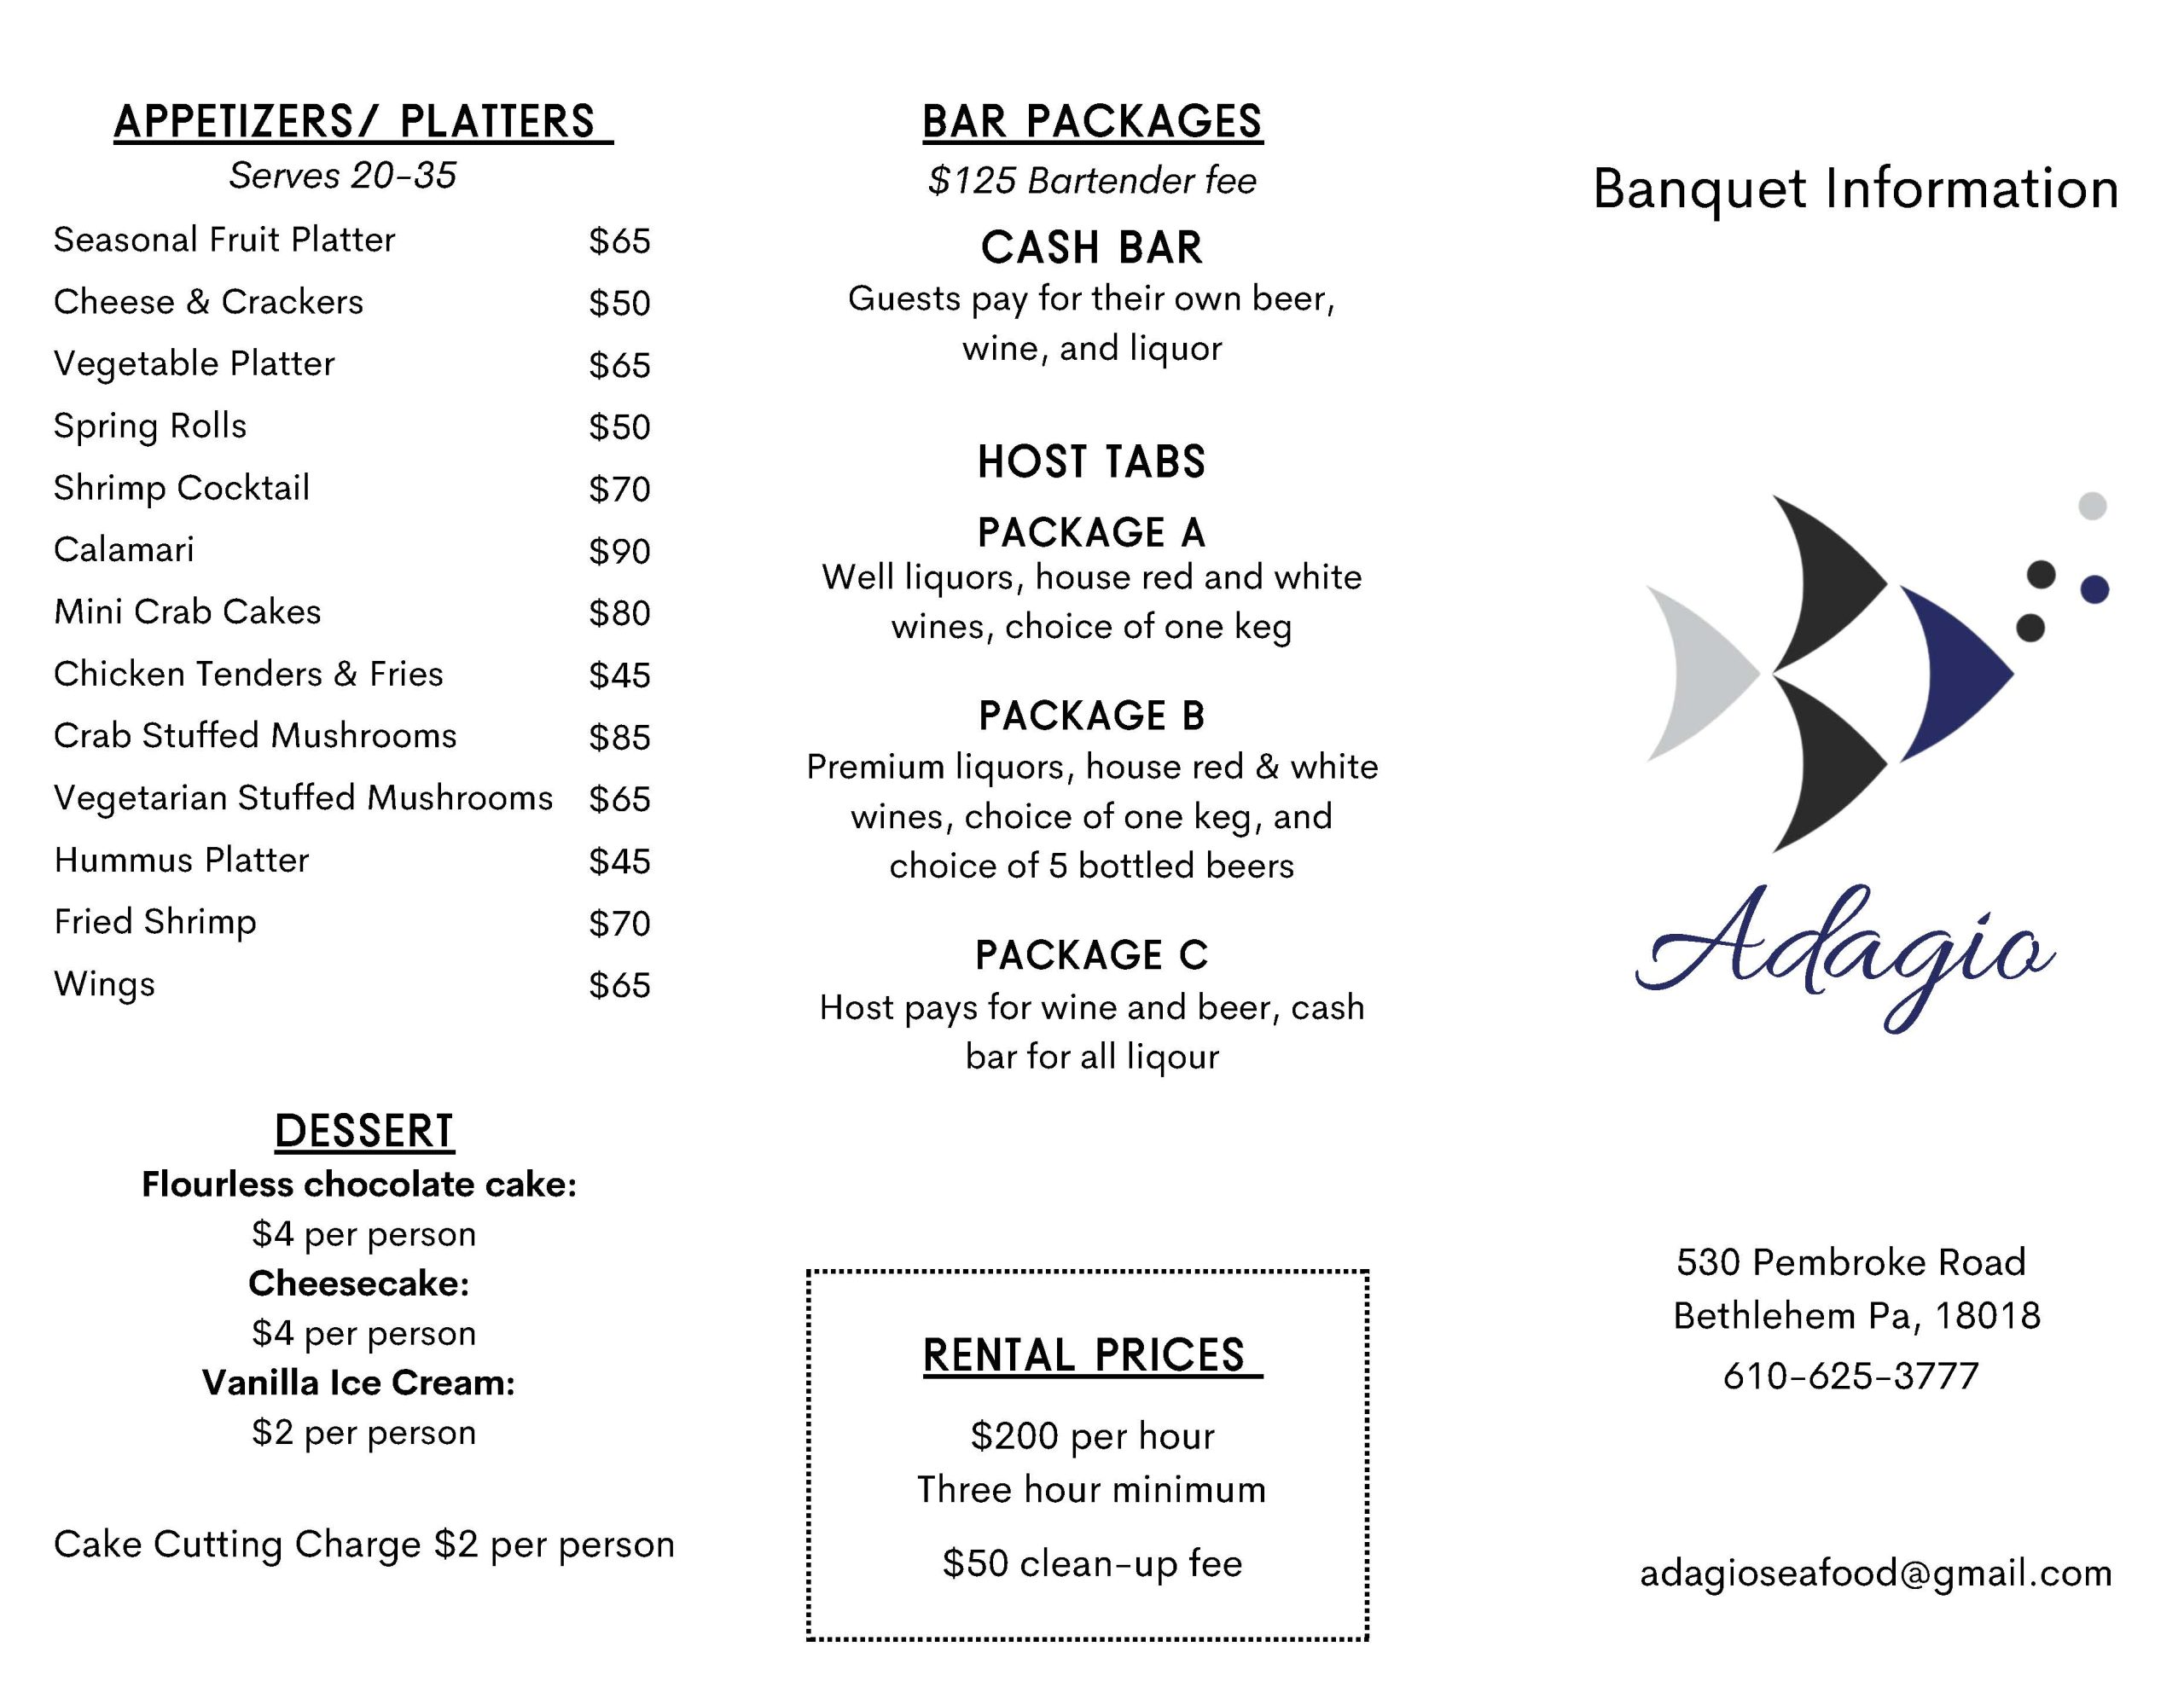 The menu for adagio's bar and grill.